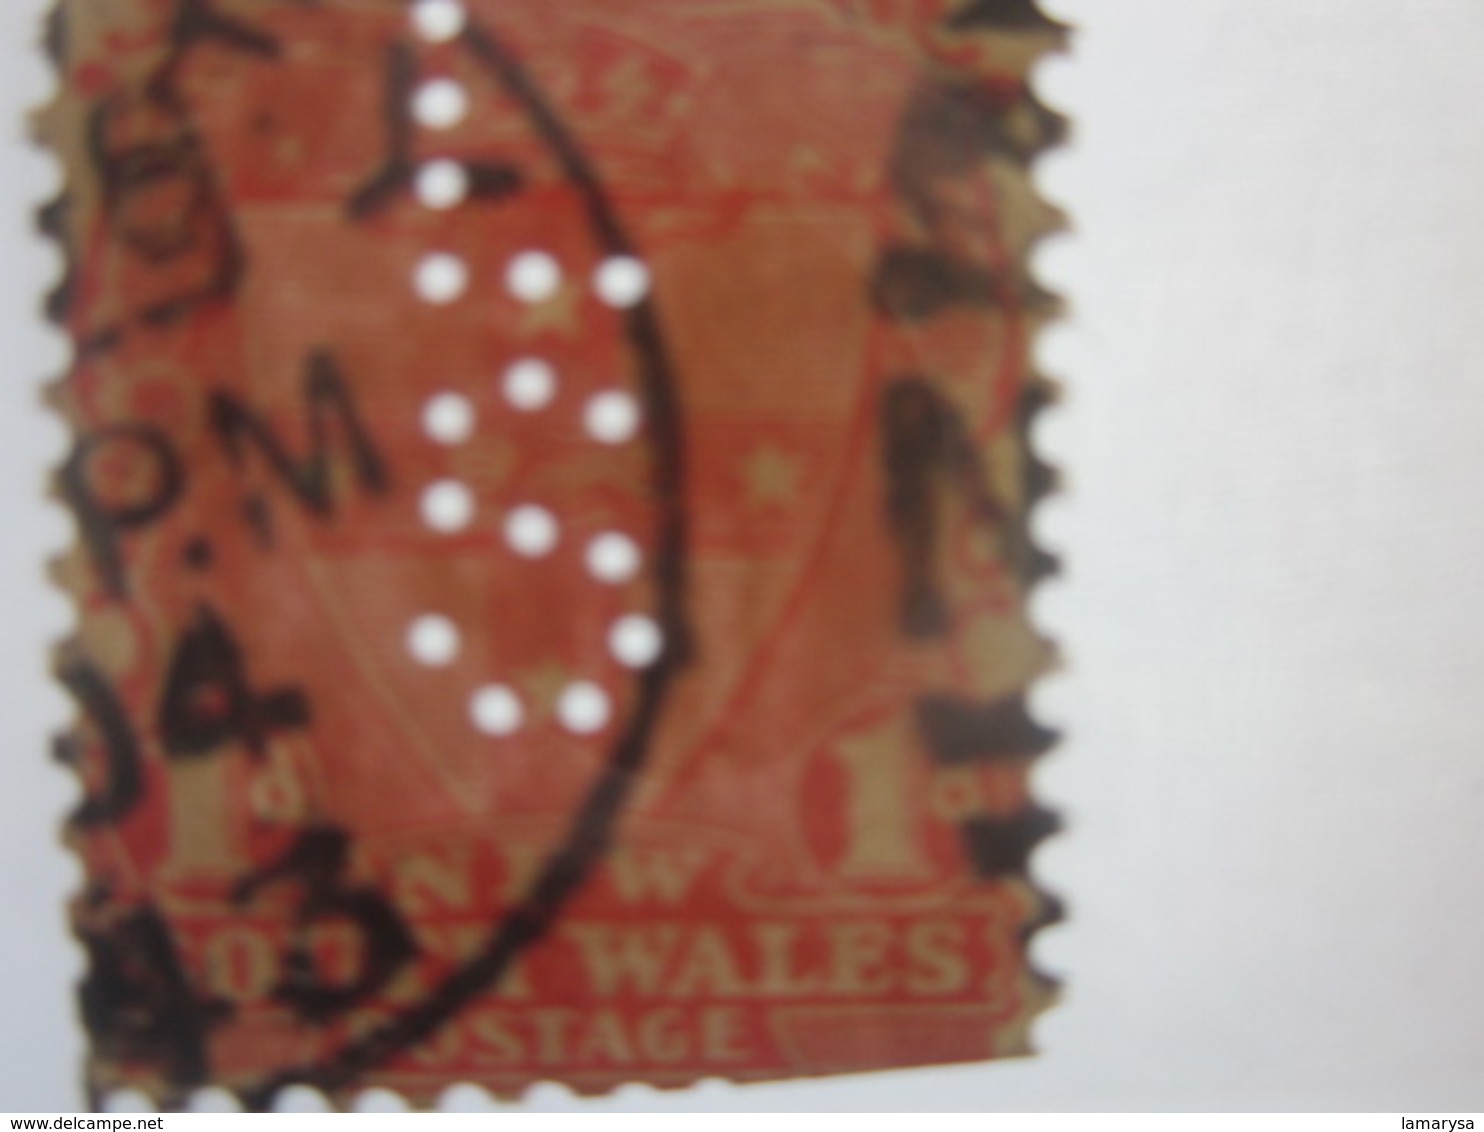 Stamp Timbre AUSTRALIE COLONY NEW SOUTH WALES Perforés Perforé Perforés Perfin Perfins Stamps Perforated Perforations LS - Perfins